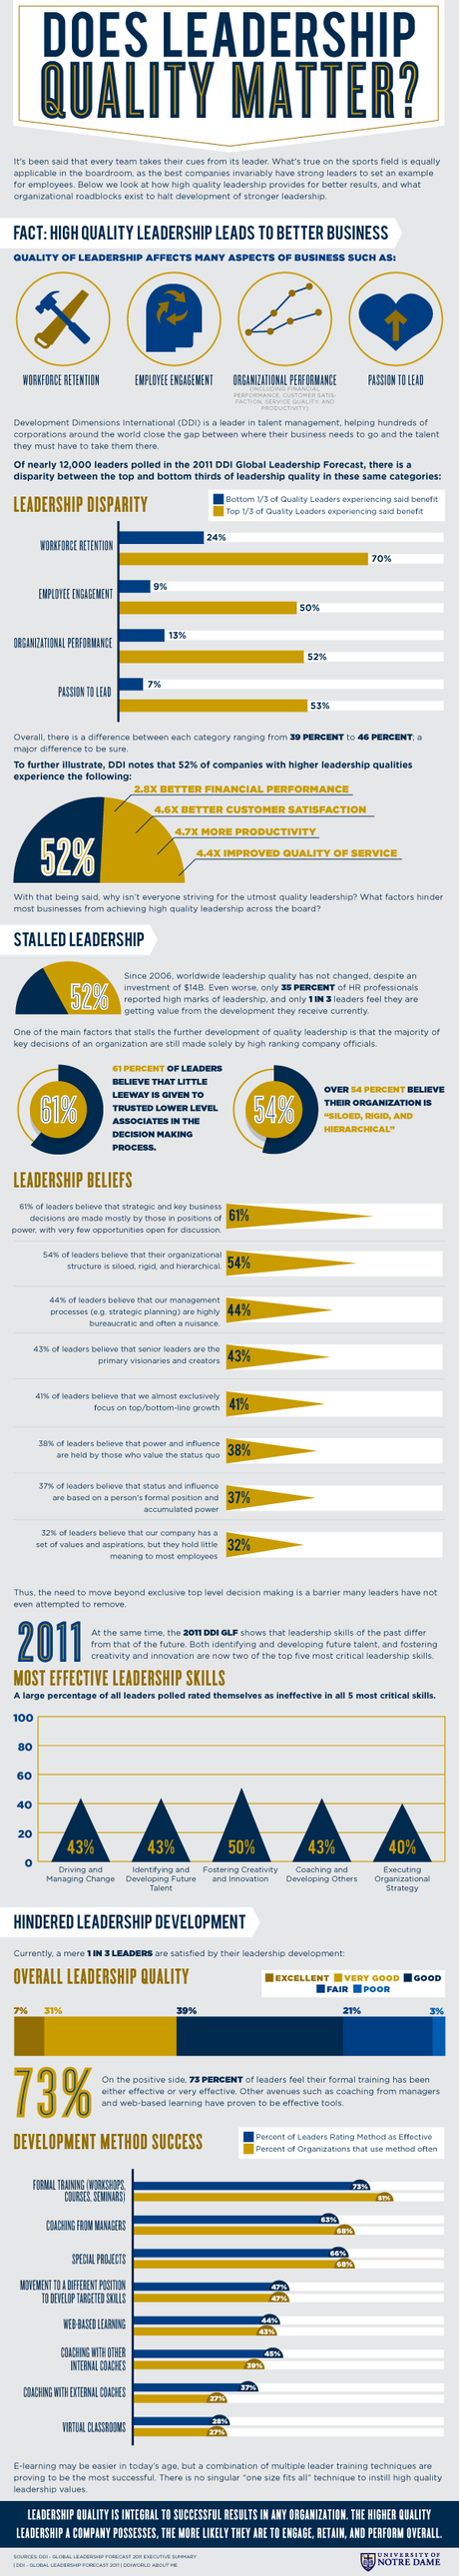 Factors and Concerns For Quality Leadership Infographic